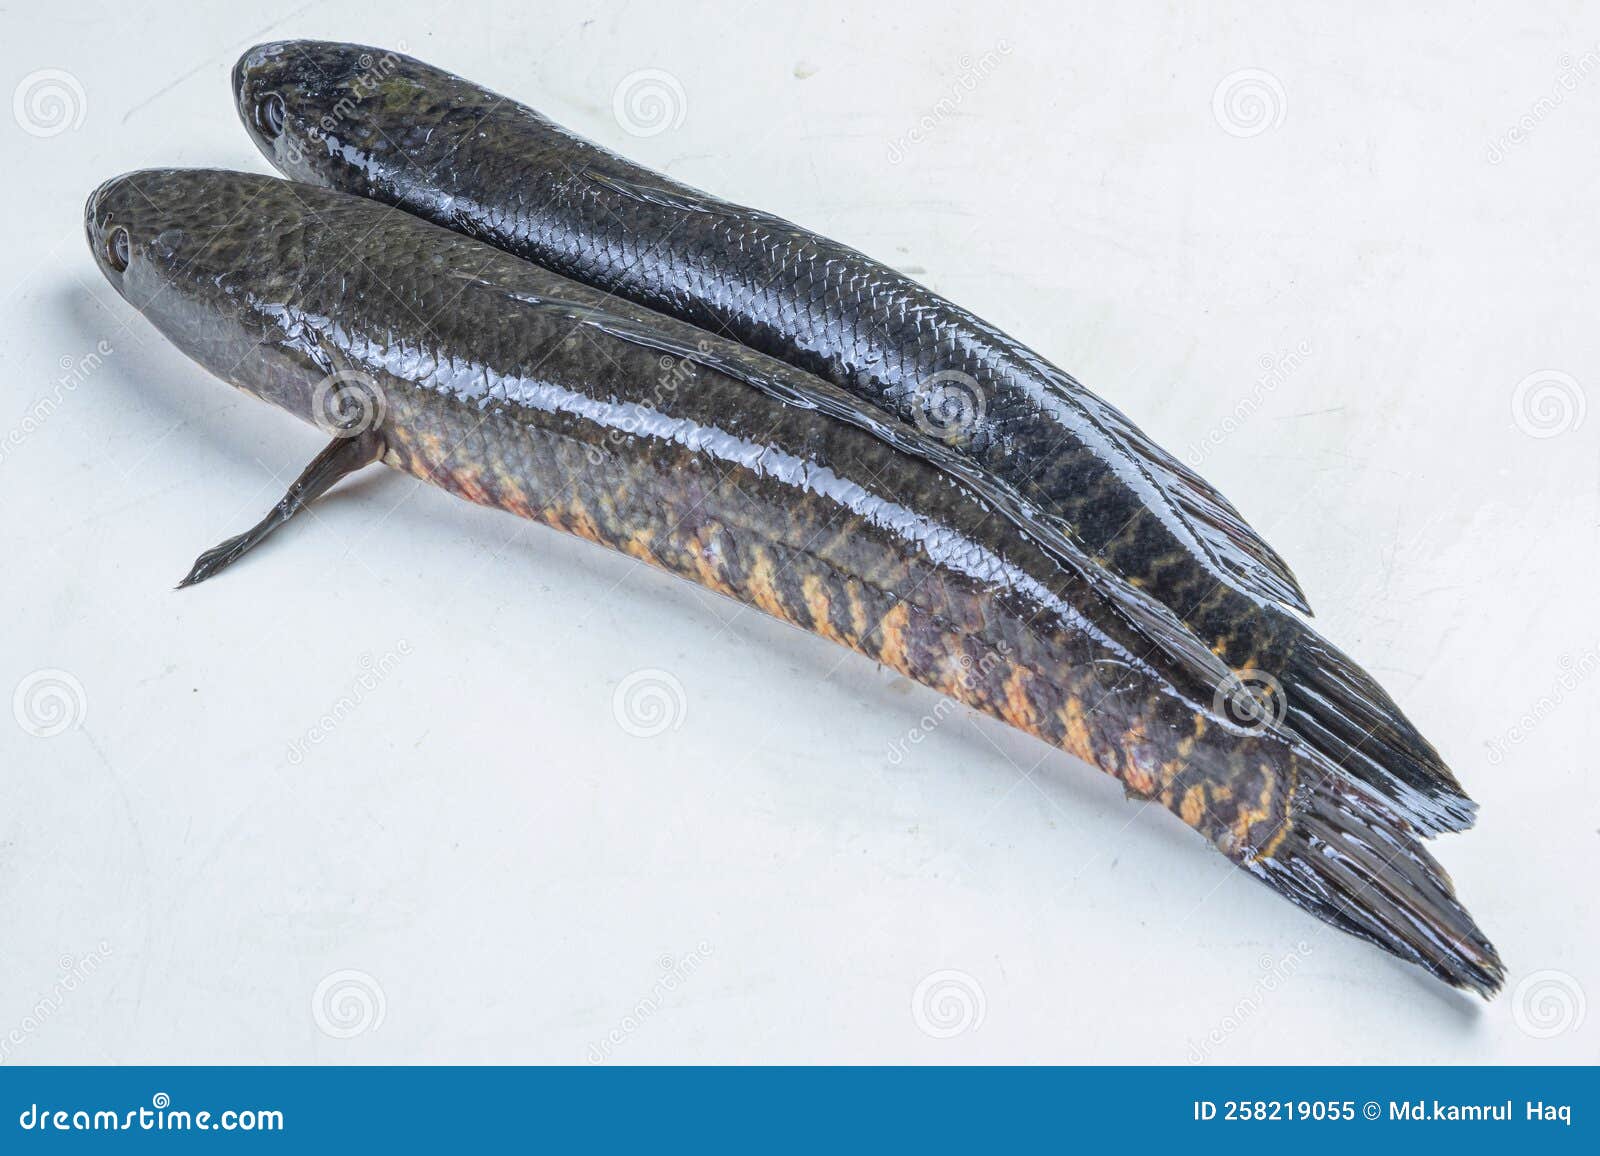 telo taki or spotted snakehead, channa punctata or spotted snakehead that found in thousands of rivers and ponds